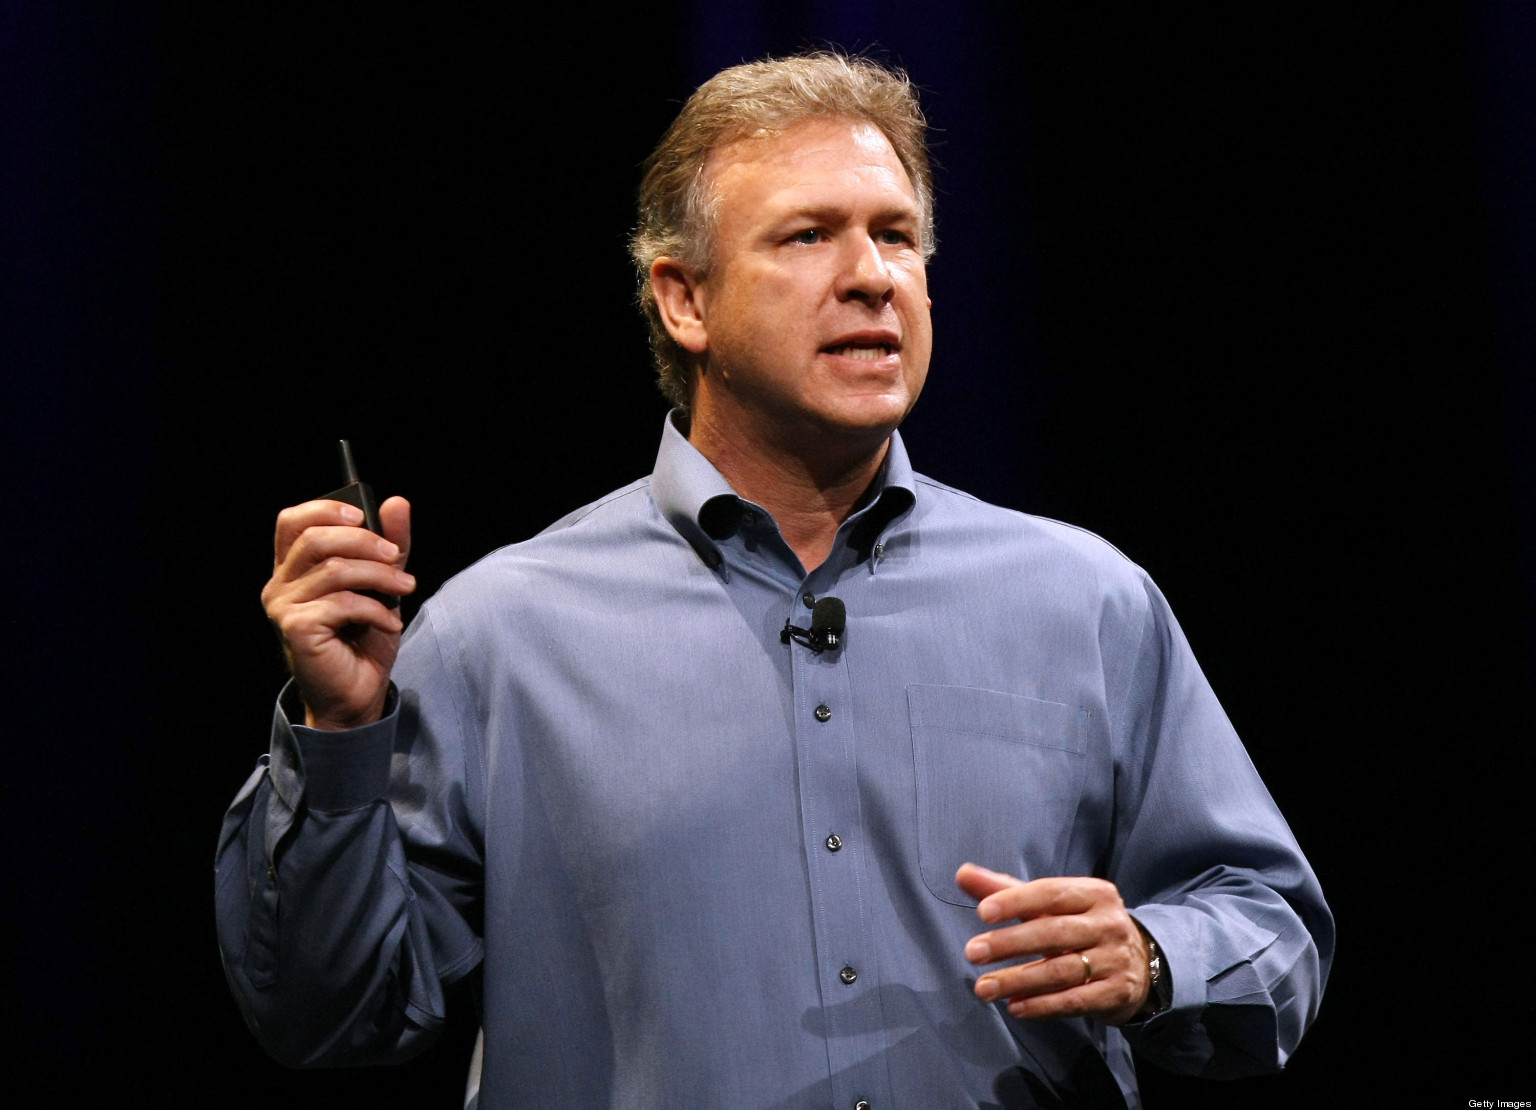 Phil Schiller Accuses Samsung Of Copying The iPhone And Hurting Its Image